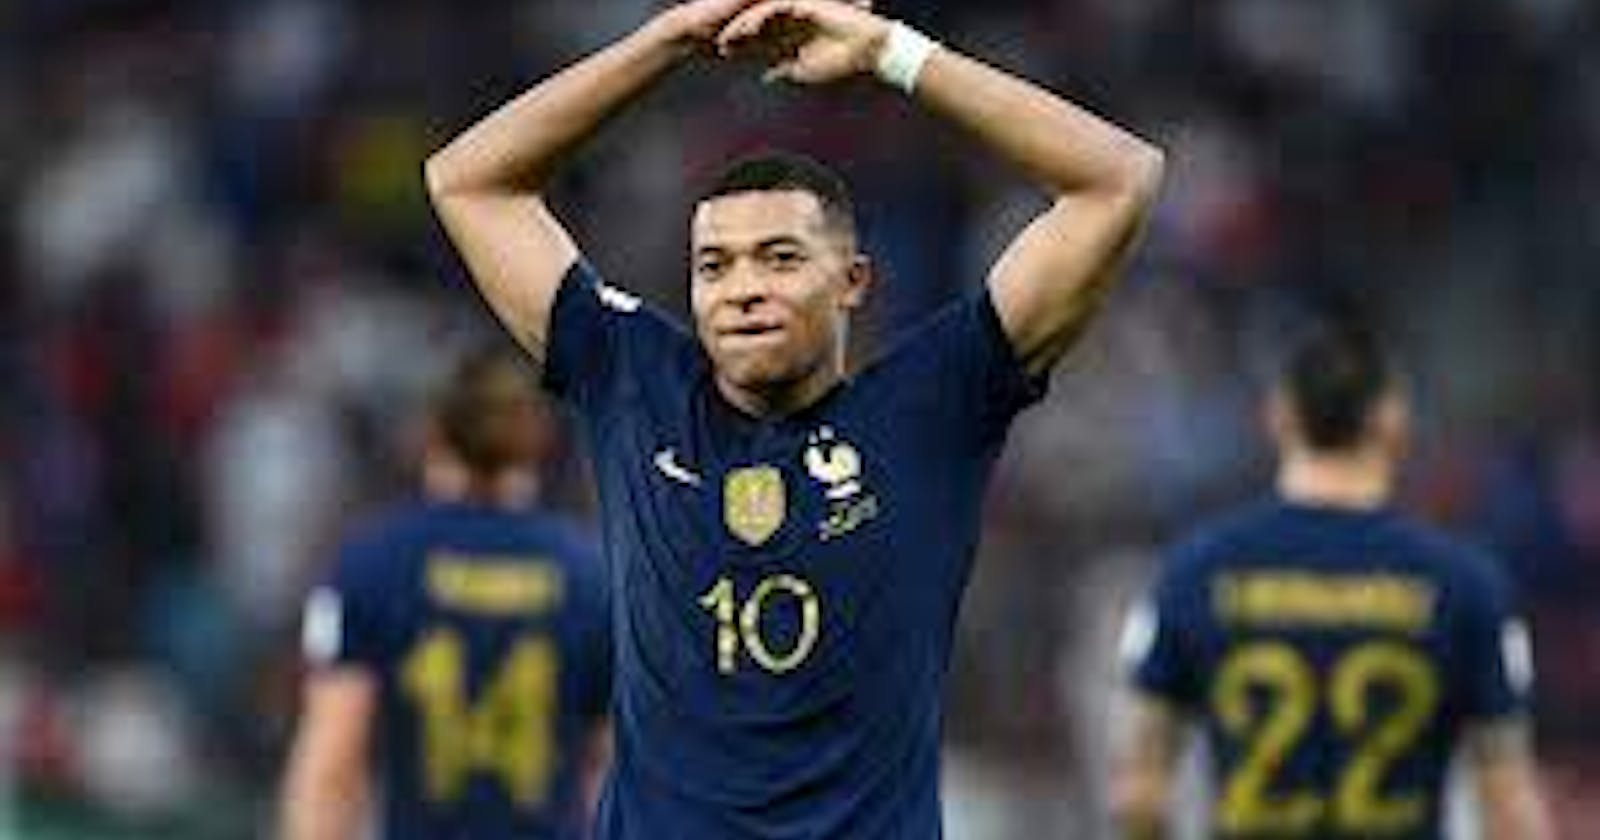 Mbappe to Madrid